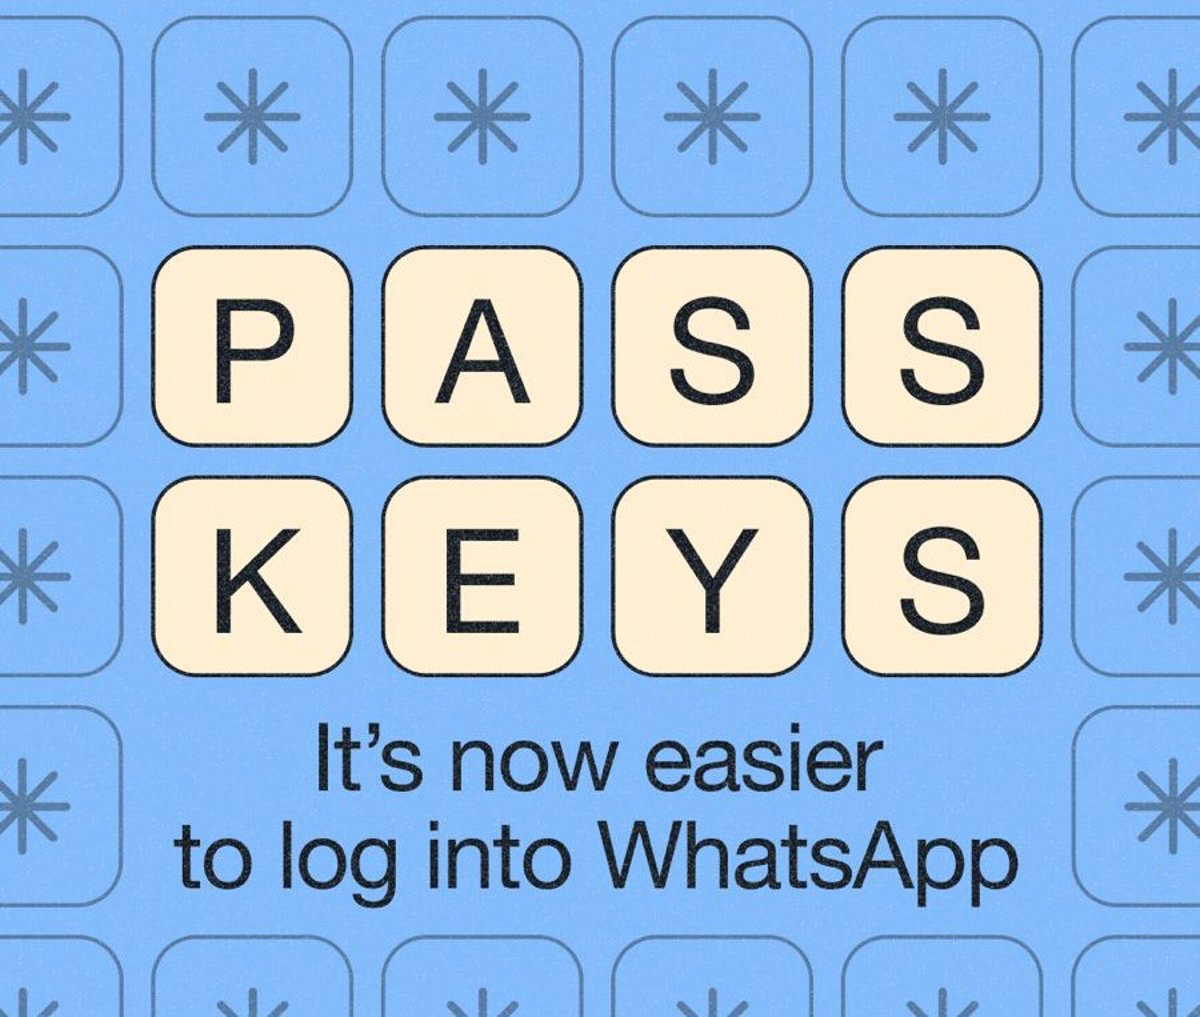 iOS devices can now use passkeys for WhatsApp login